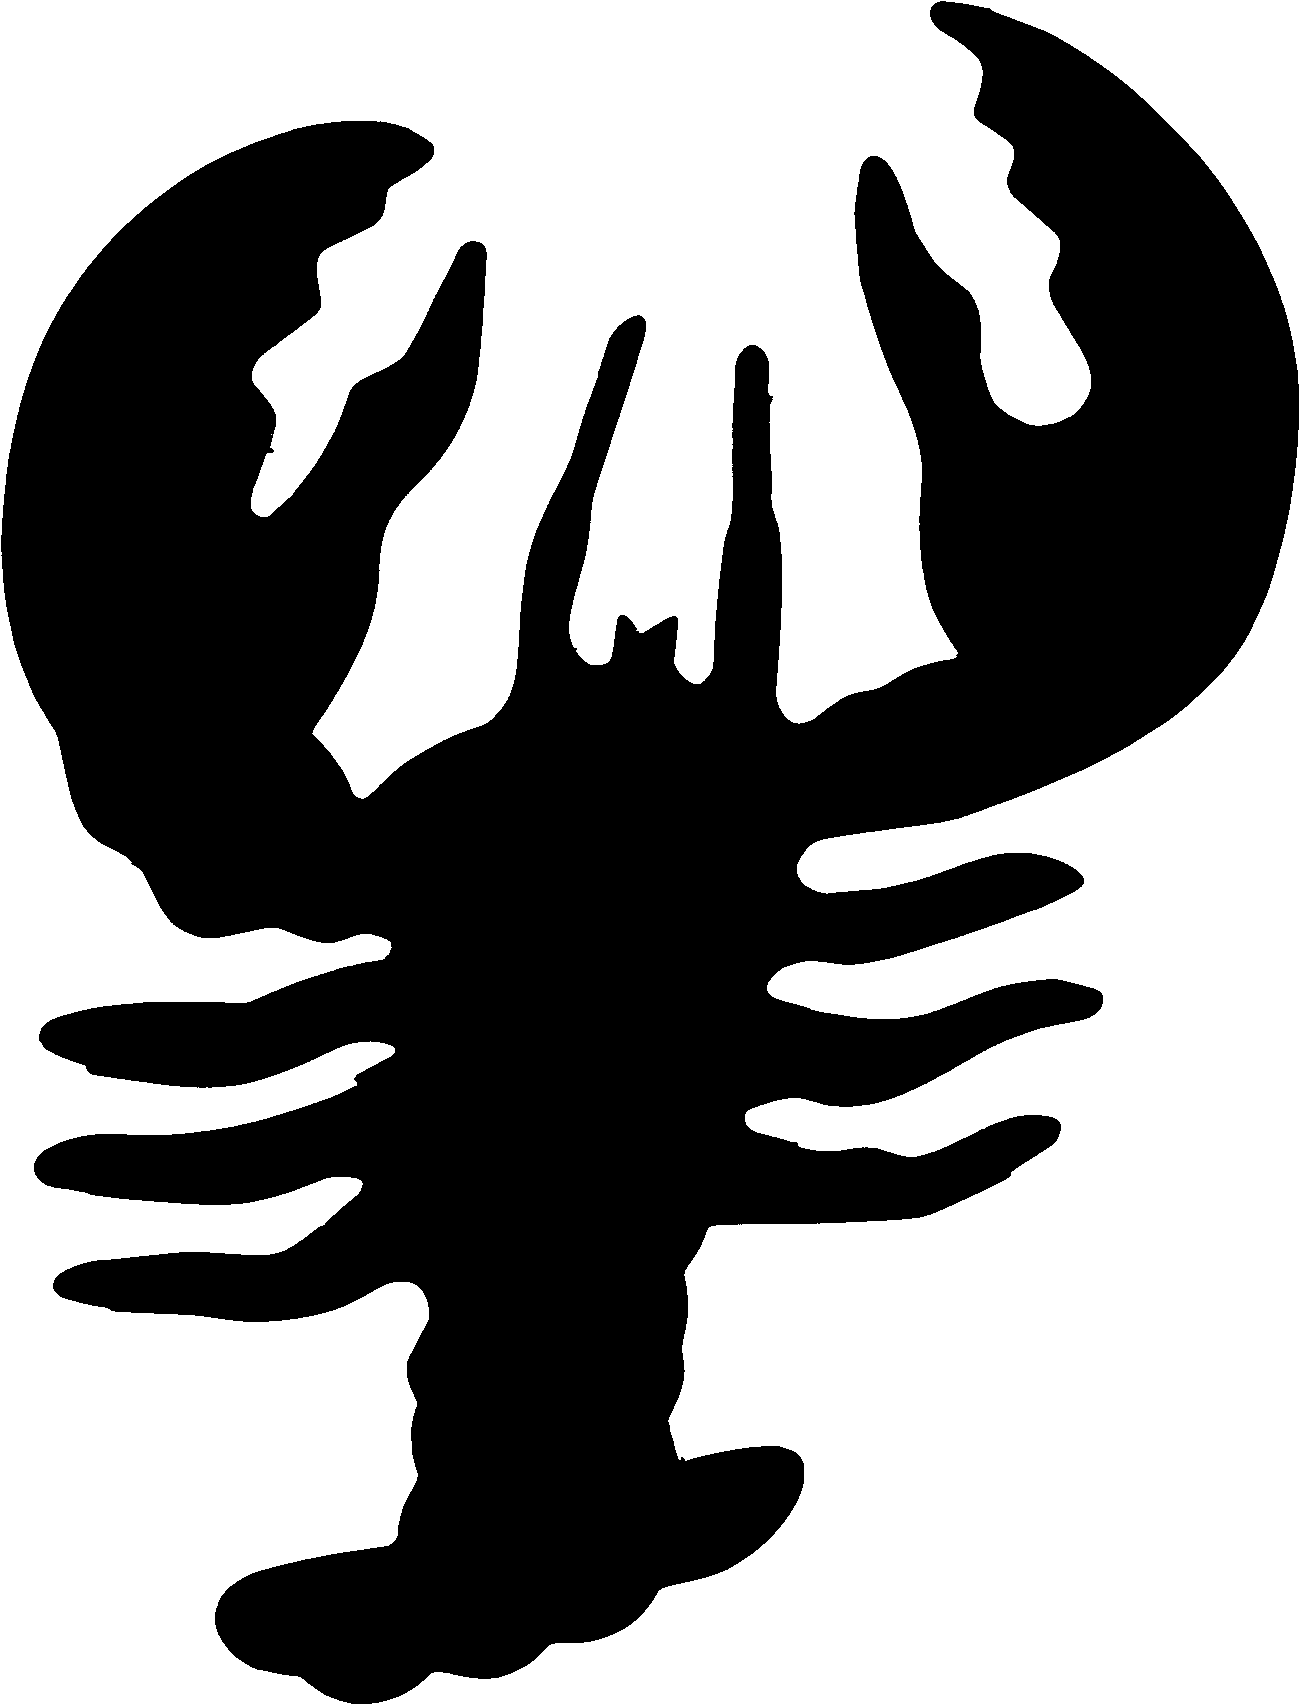 Lobster clipart #4, Download drawings